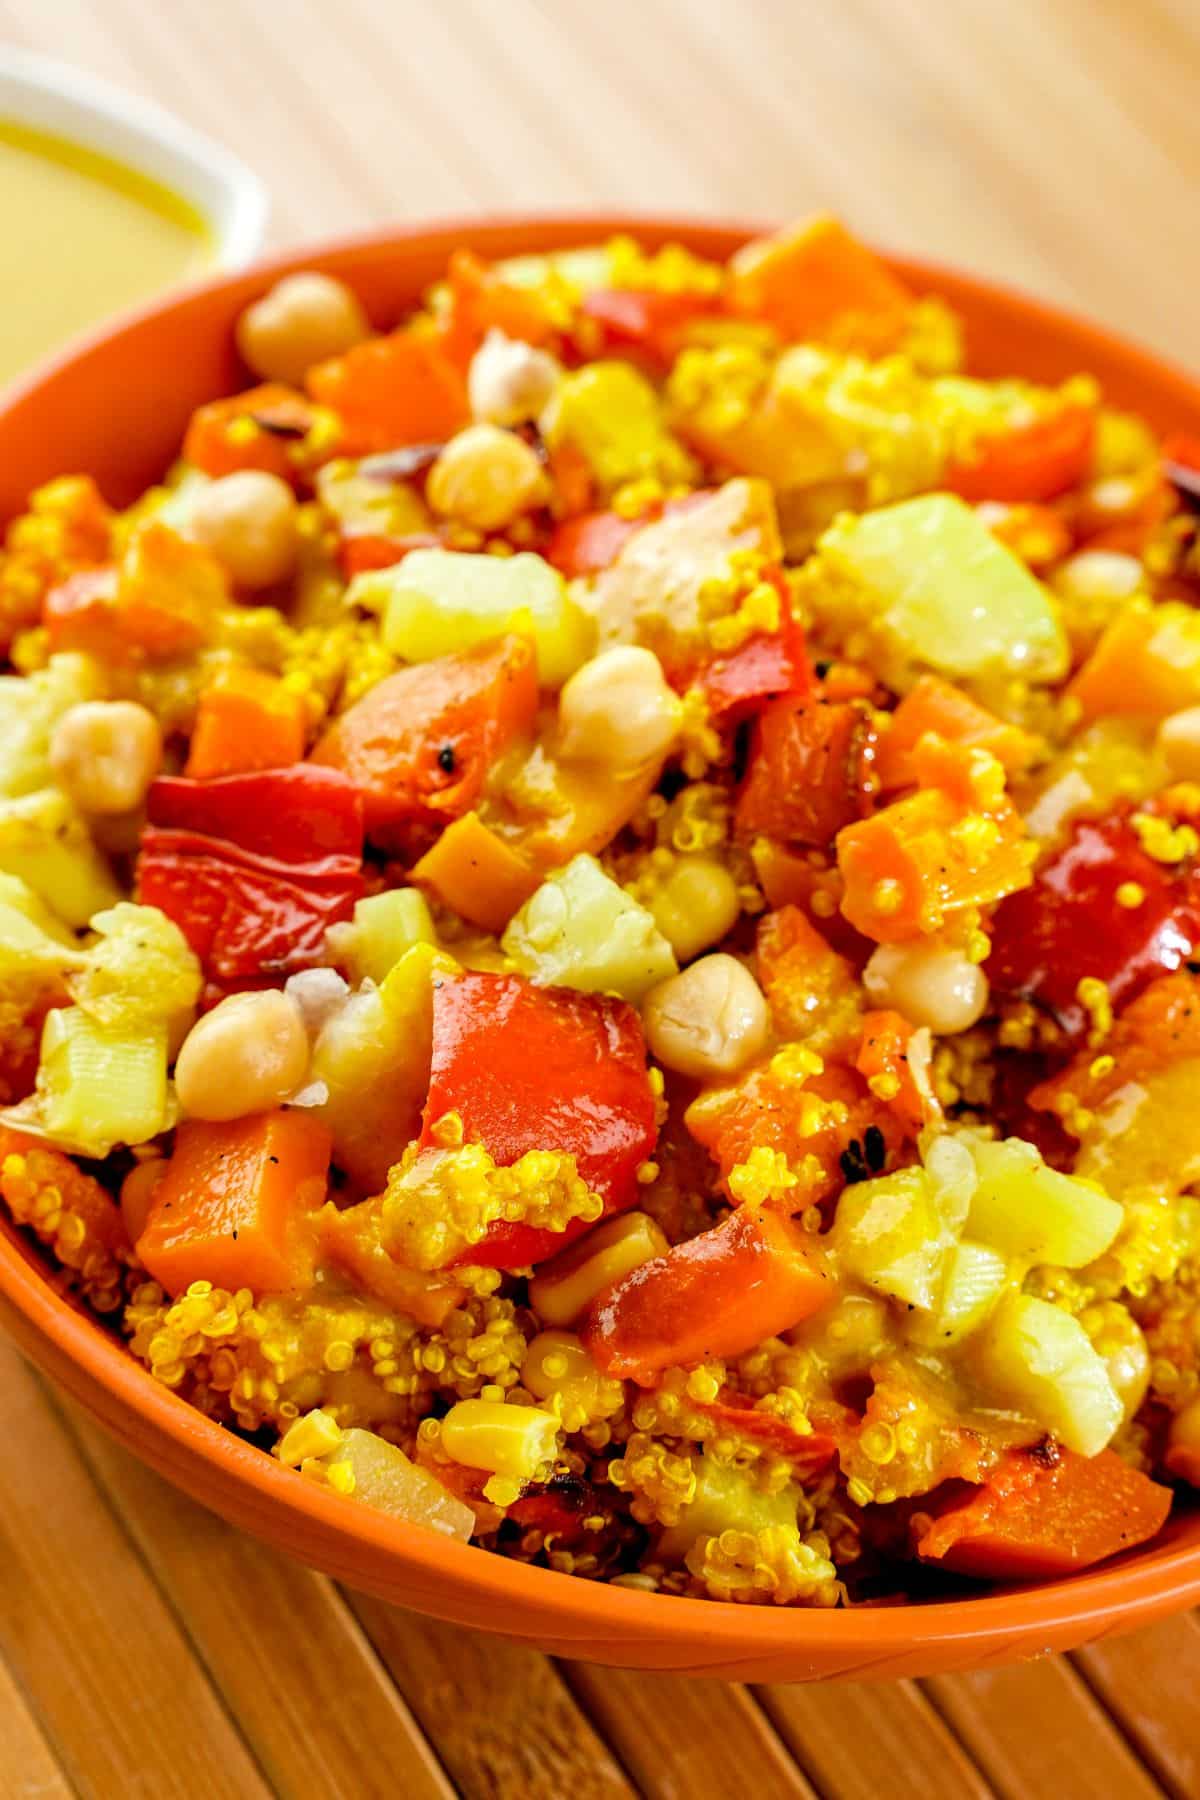 orange bowl of quinoa salad with chickpeas and squash on top of wood table